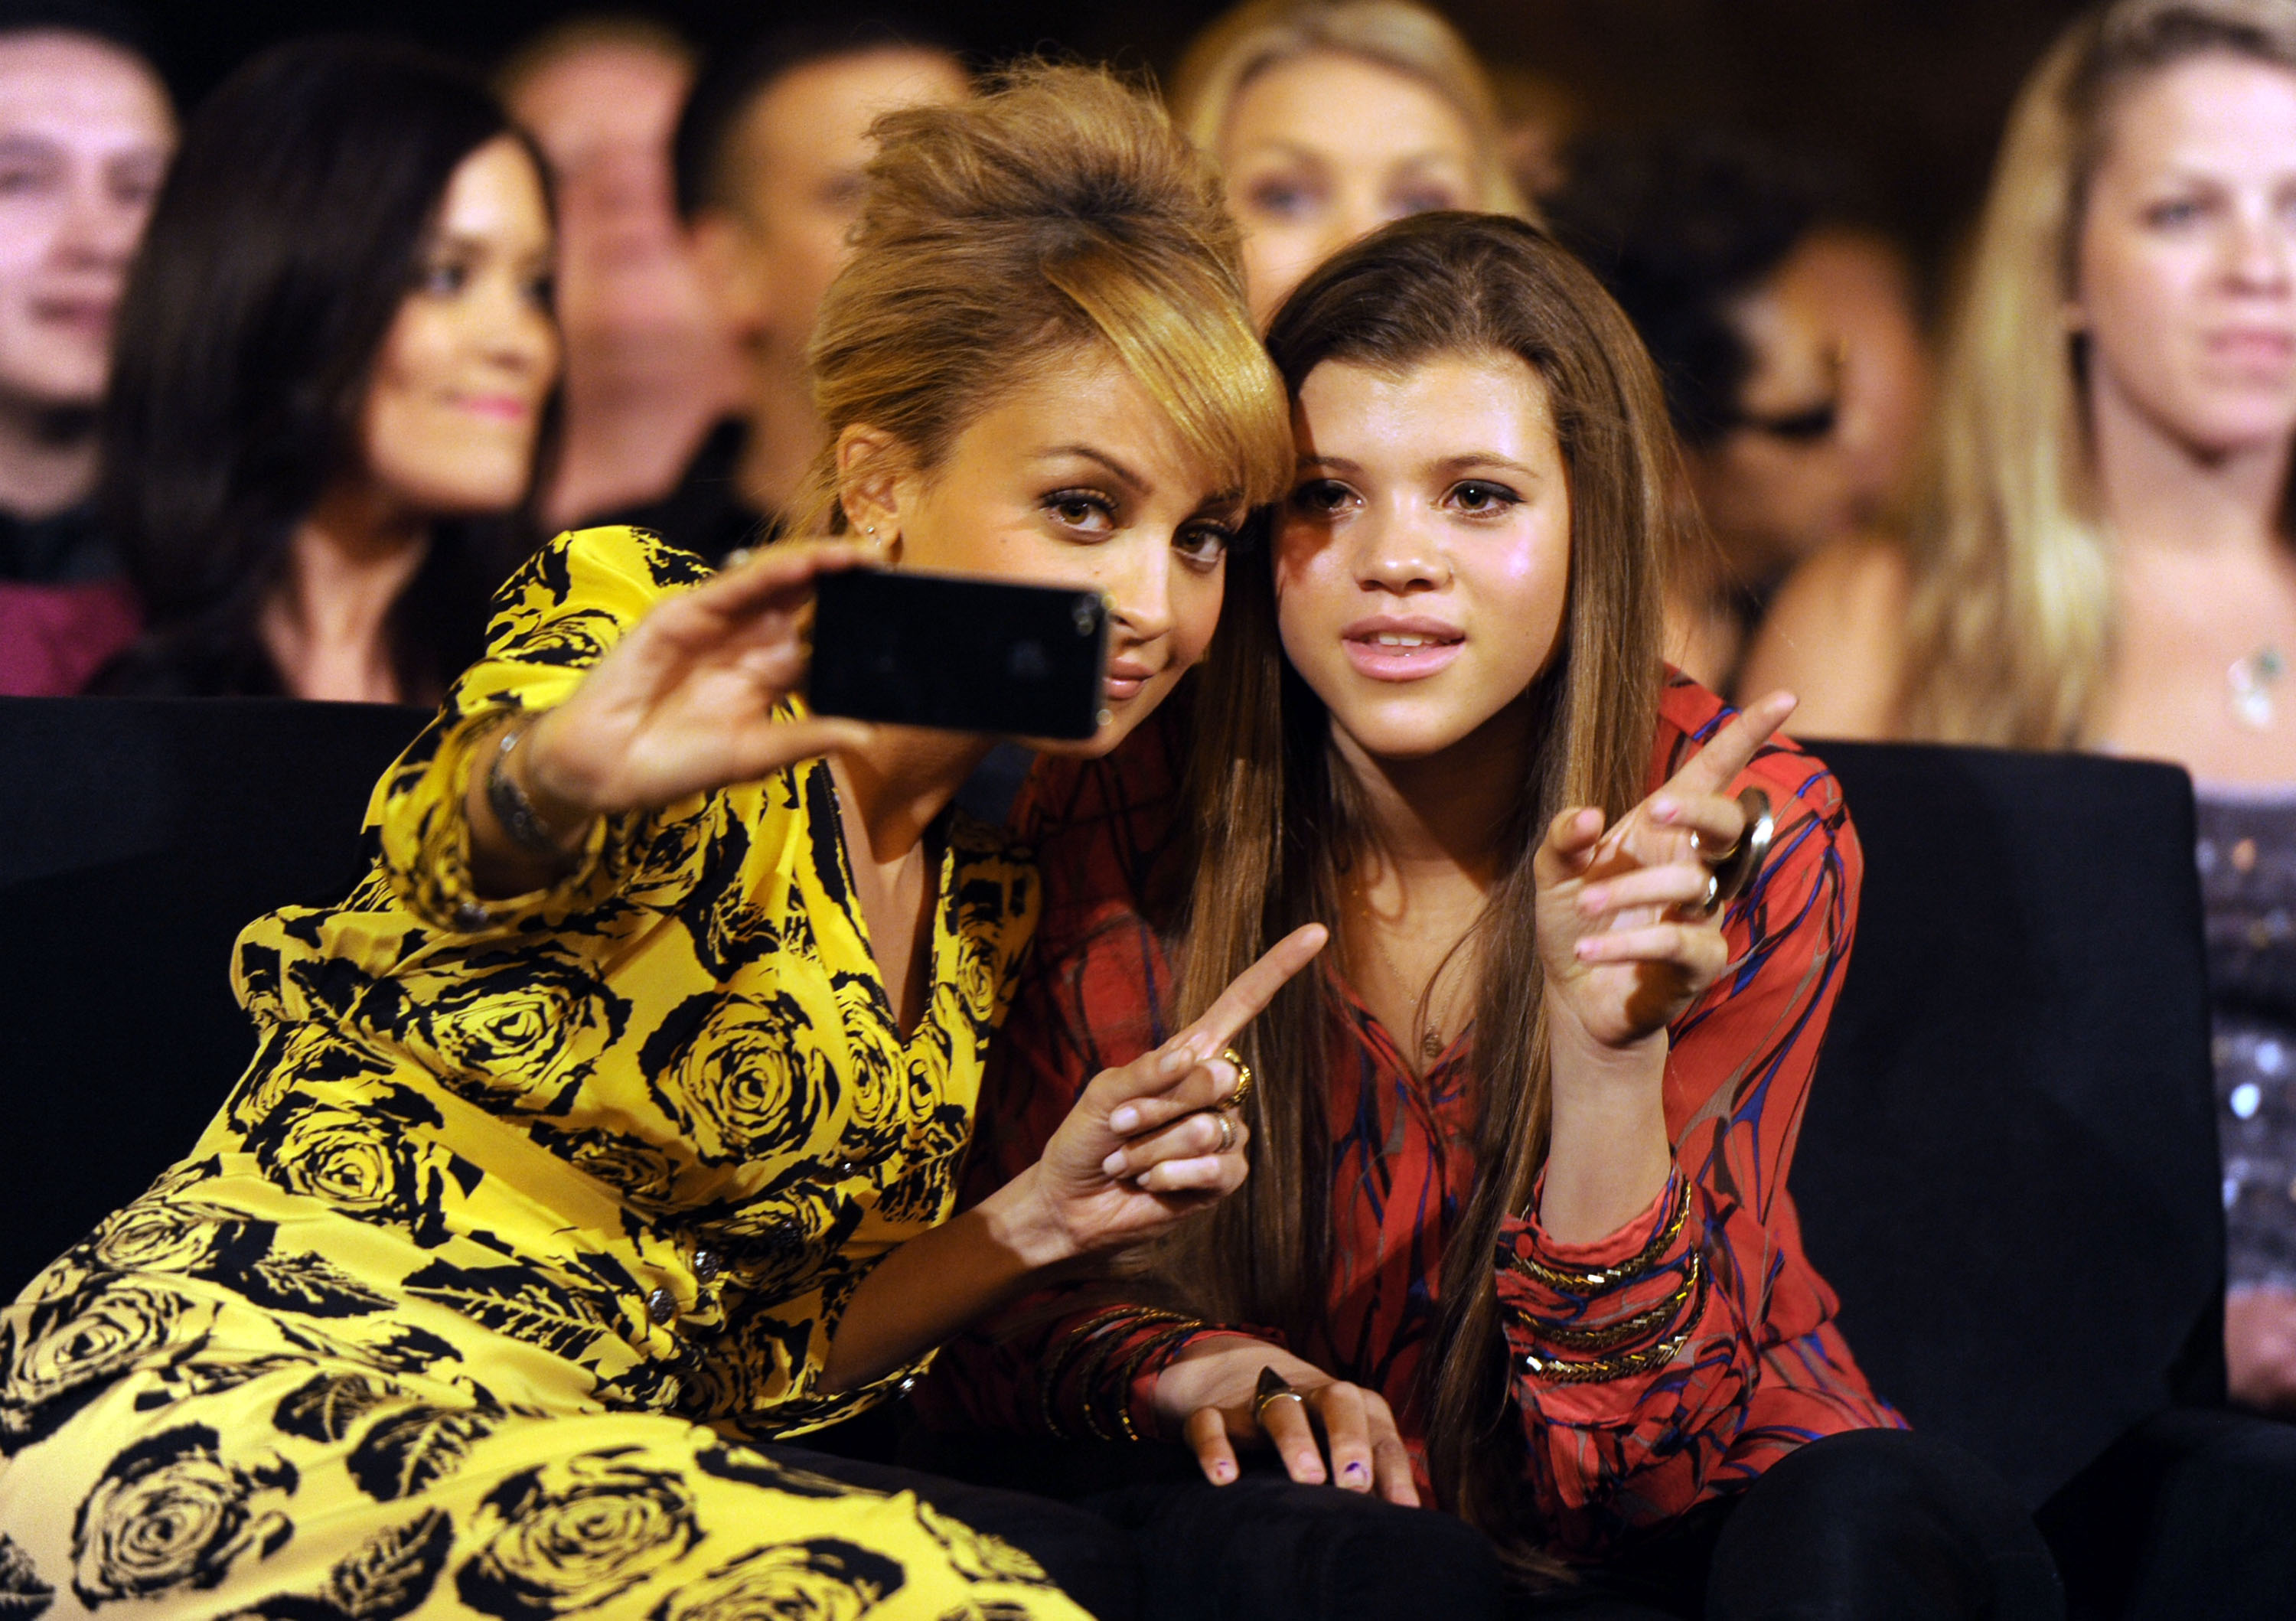 Nicole Richie and Sofia Richie at the Lionel Richie and Friends in Concert at the MGM Grand Garden Arena on April 2, 2012 in Las Vegas, Nevada. | Source: Getty Images